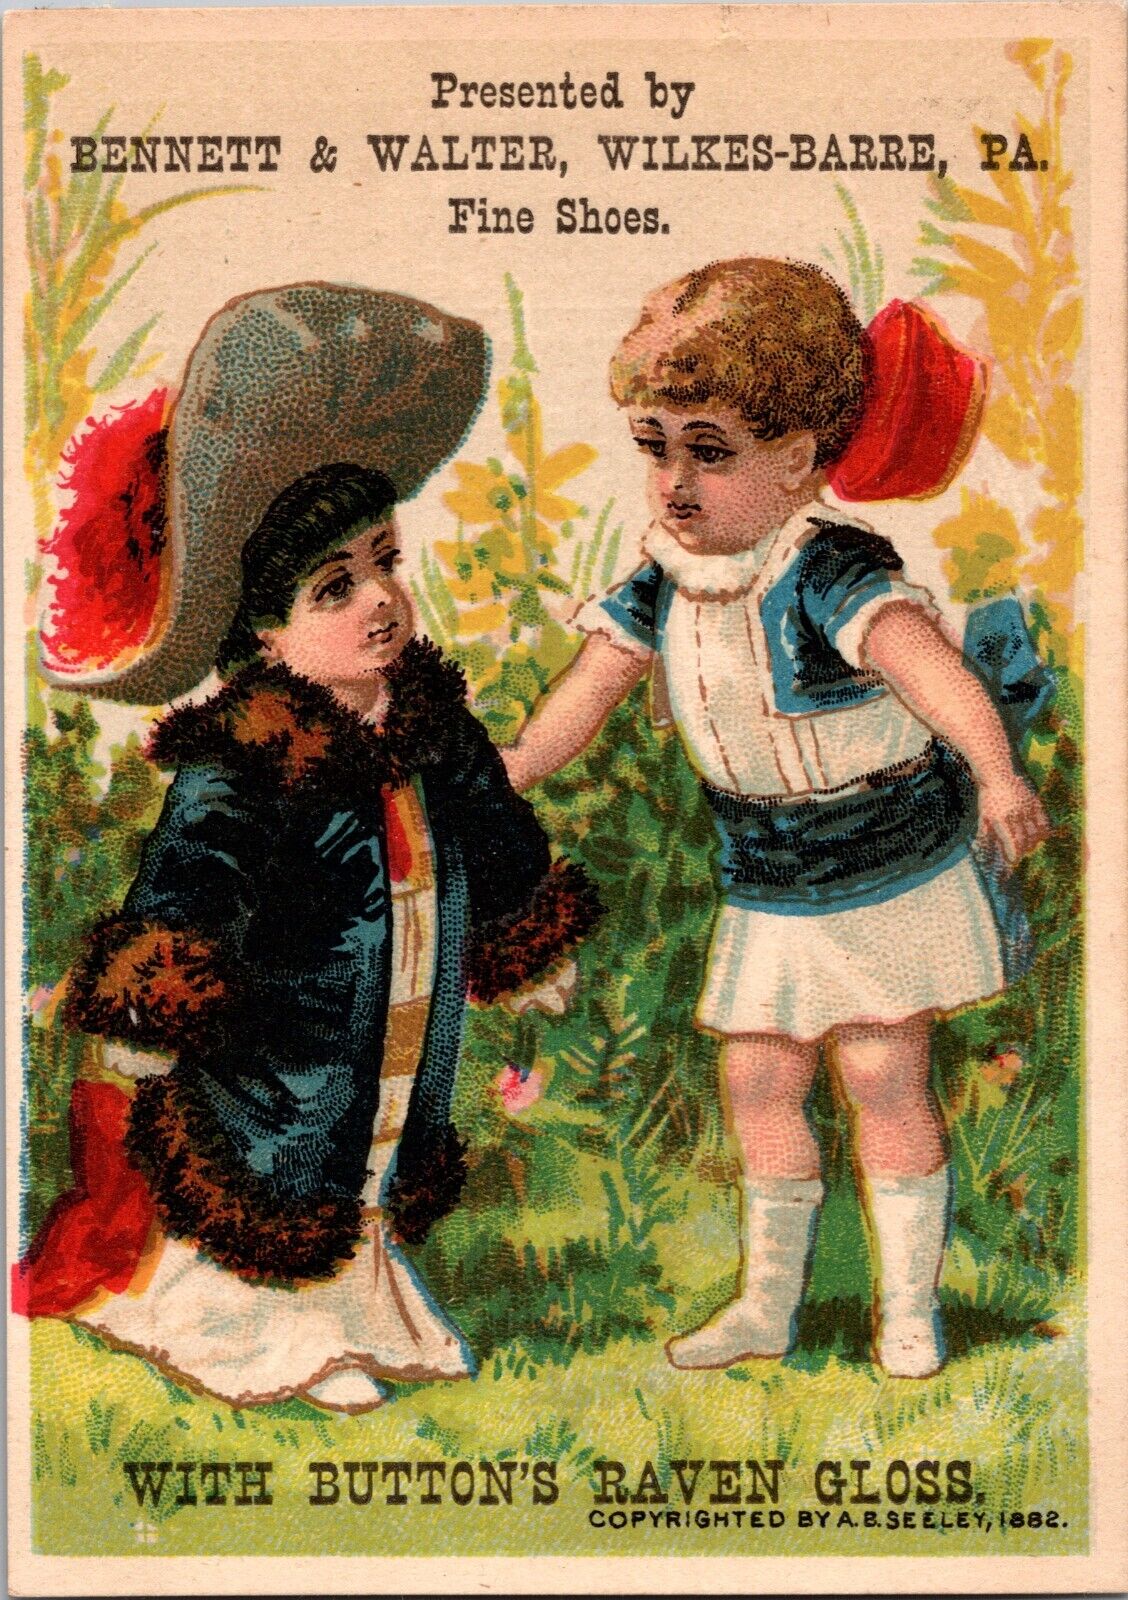 AO-459 PA Wilkes-Barre Bennett Walter Fine Shoes Two Girls Victorian Trade Card